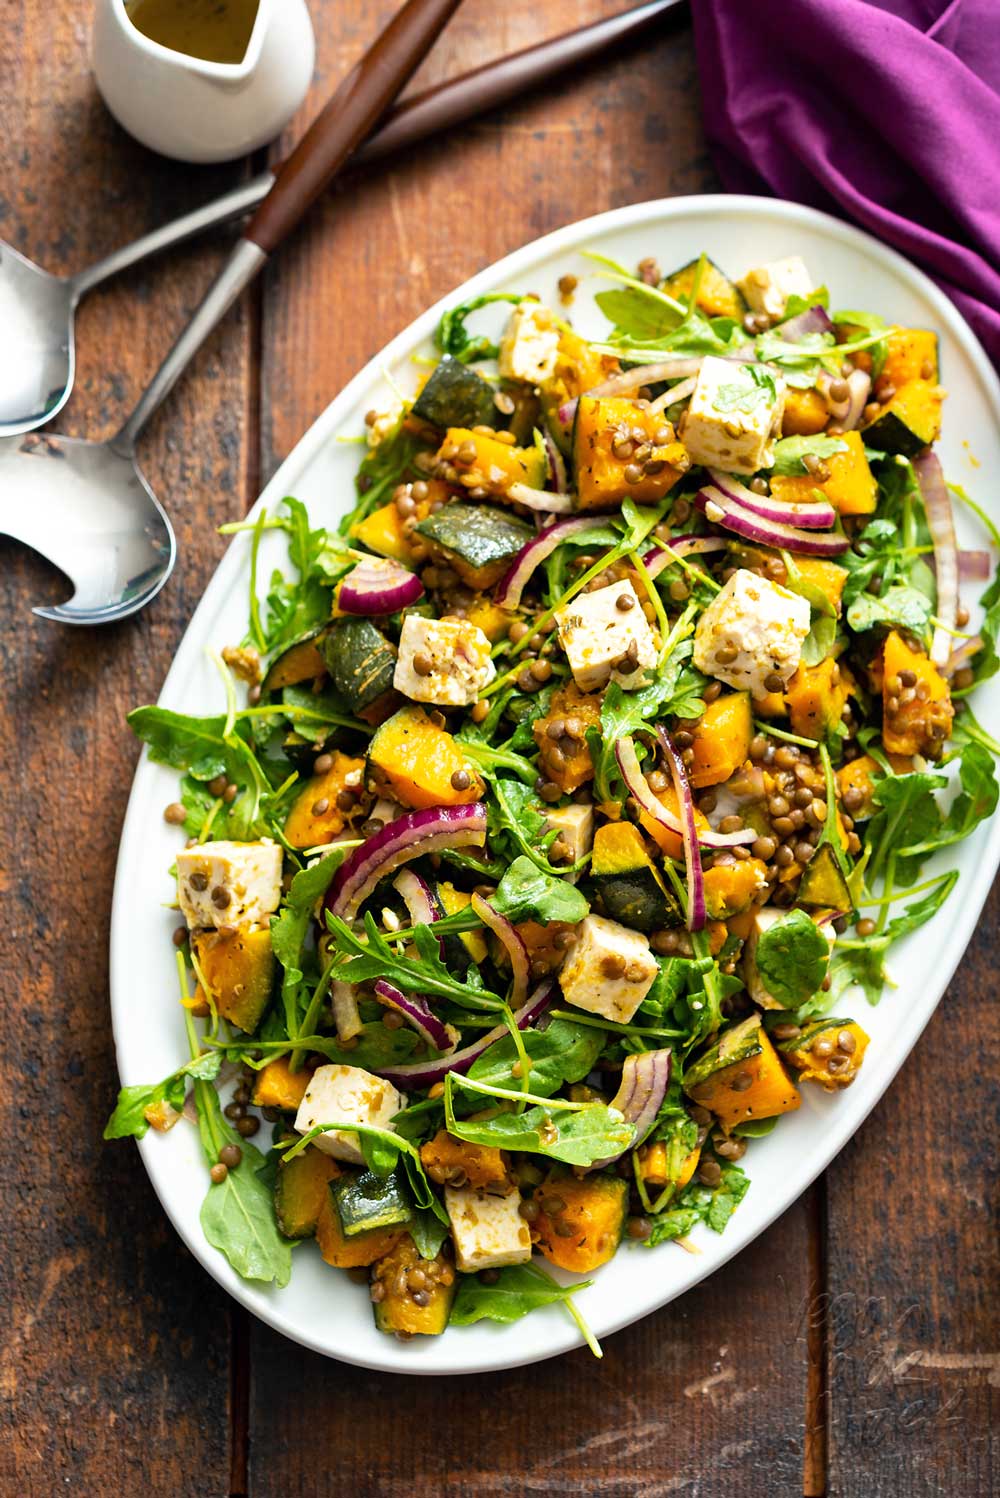 To ring in the season, I've brought a squash recipe to the table! This Kabocha Squash Feta Salad is booming with flavor and color. #vegan #glutenfree #nutfree